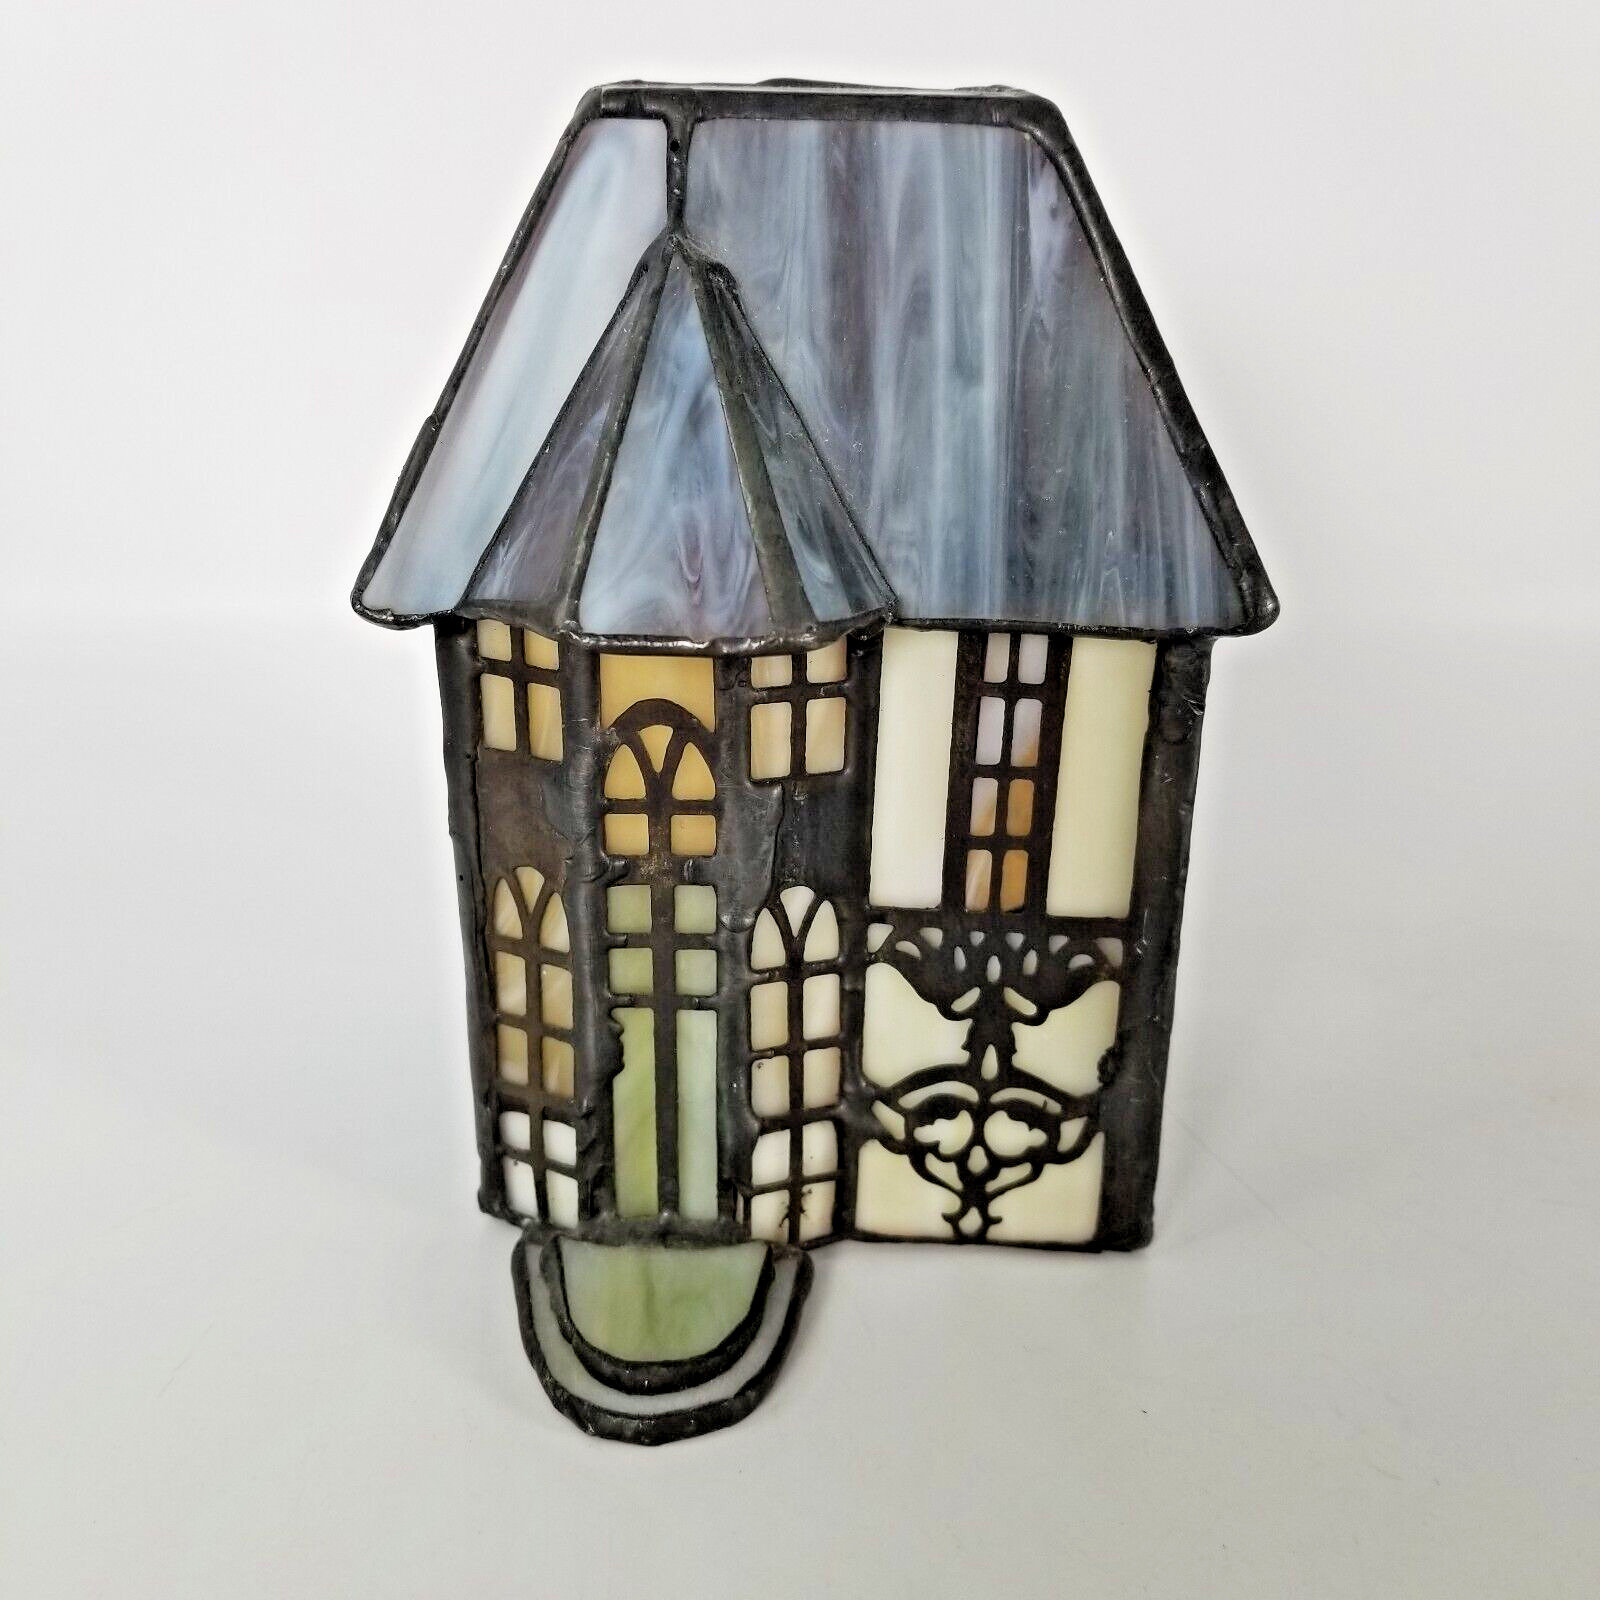 RARE Vintage Stained Glass Christmas Village House Light Cover